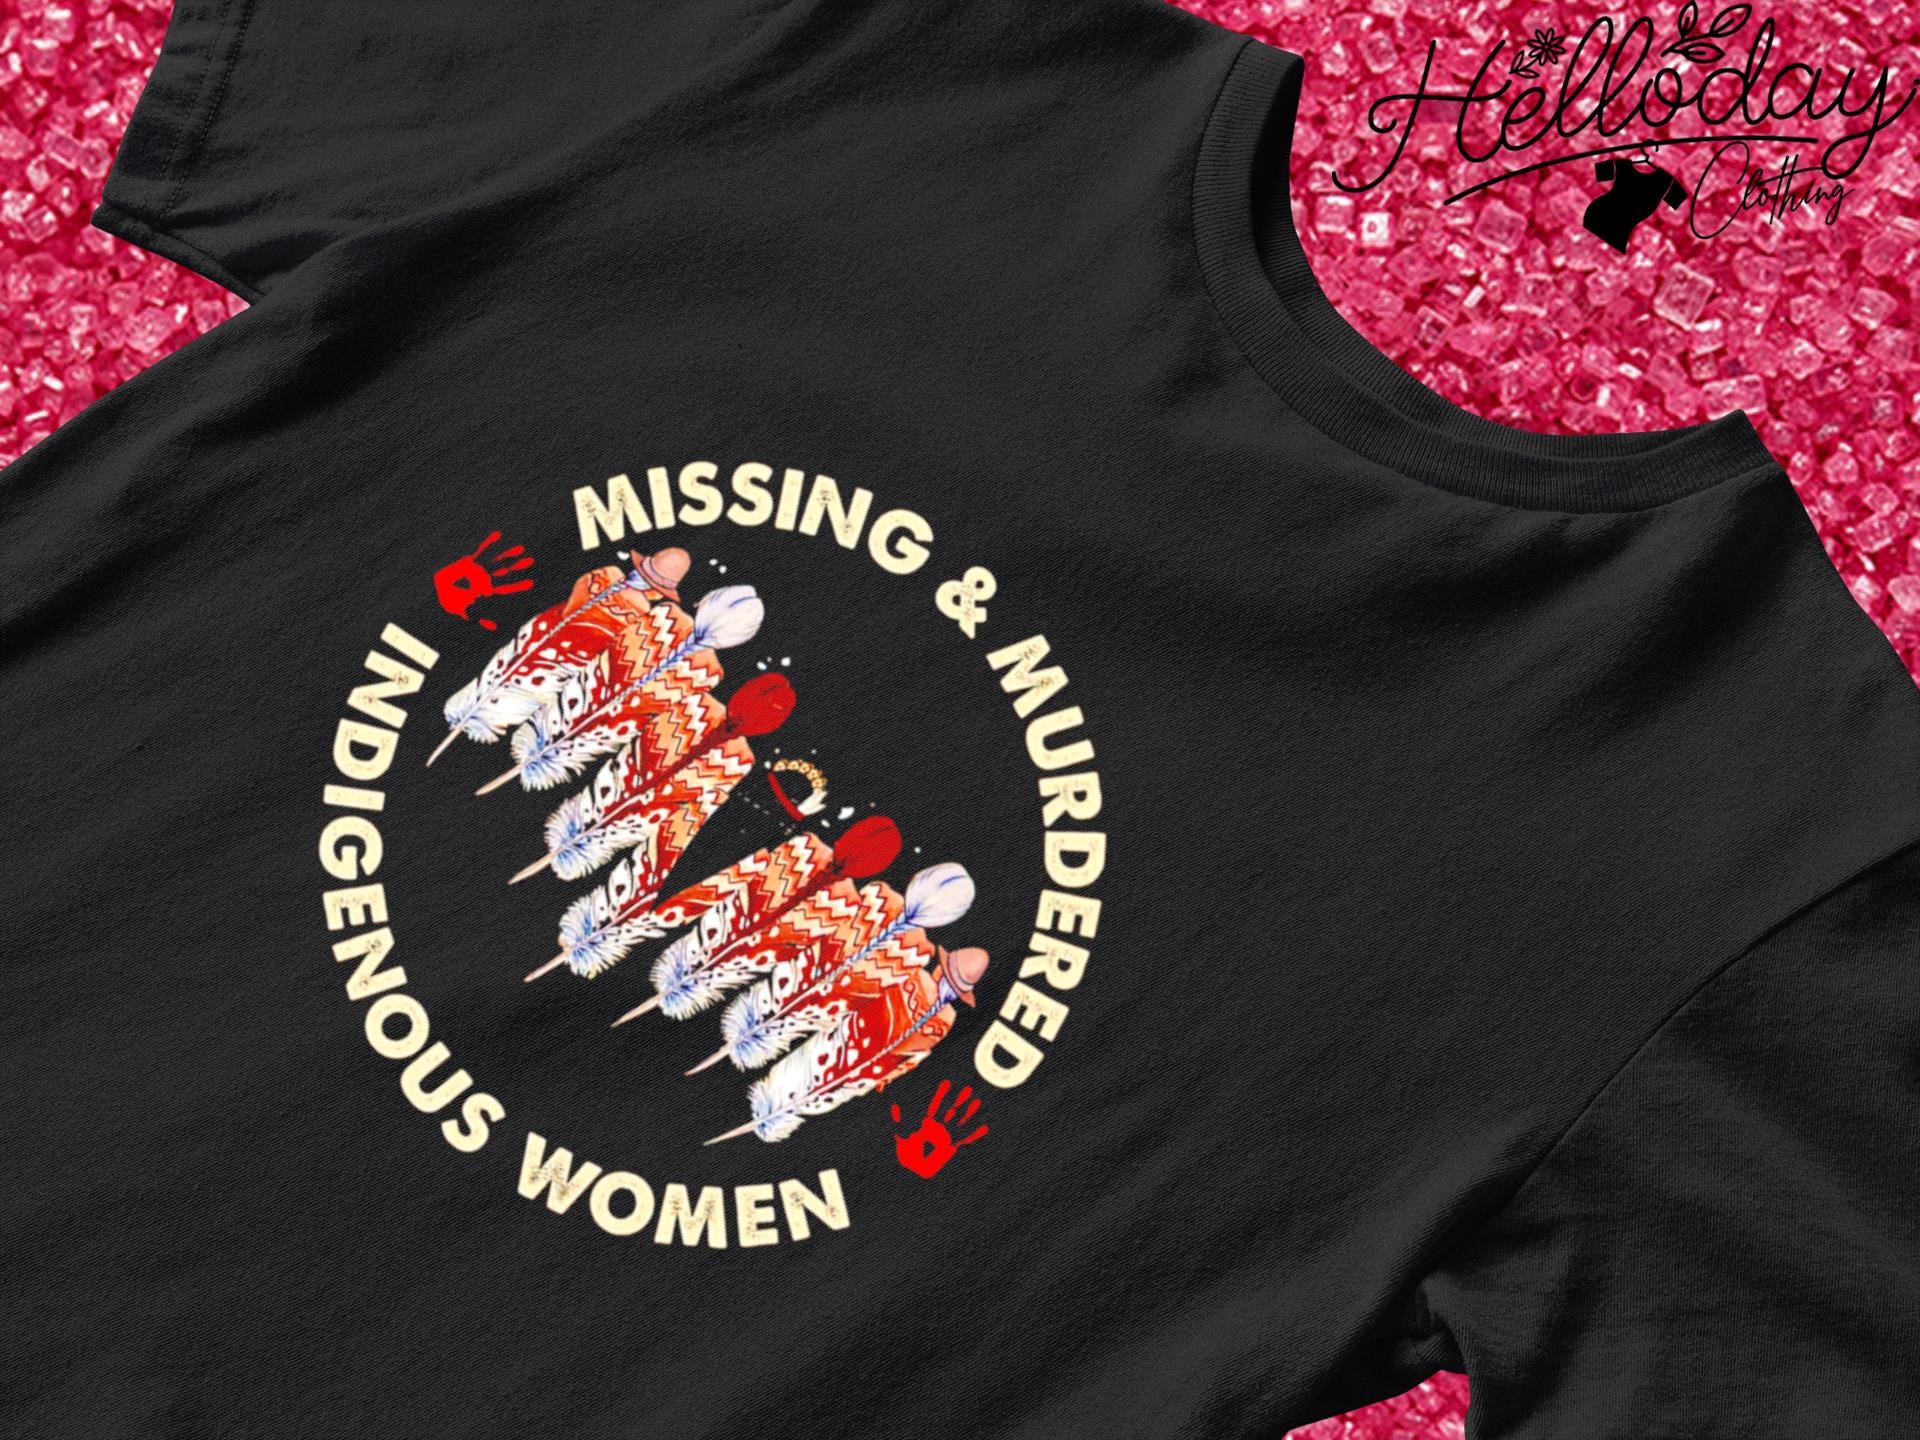 Missing and Murdered Indigenous Women shirt